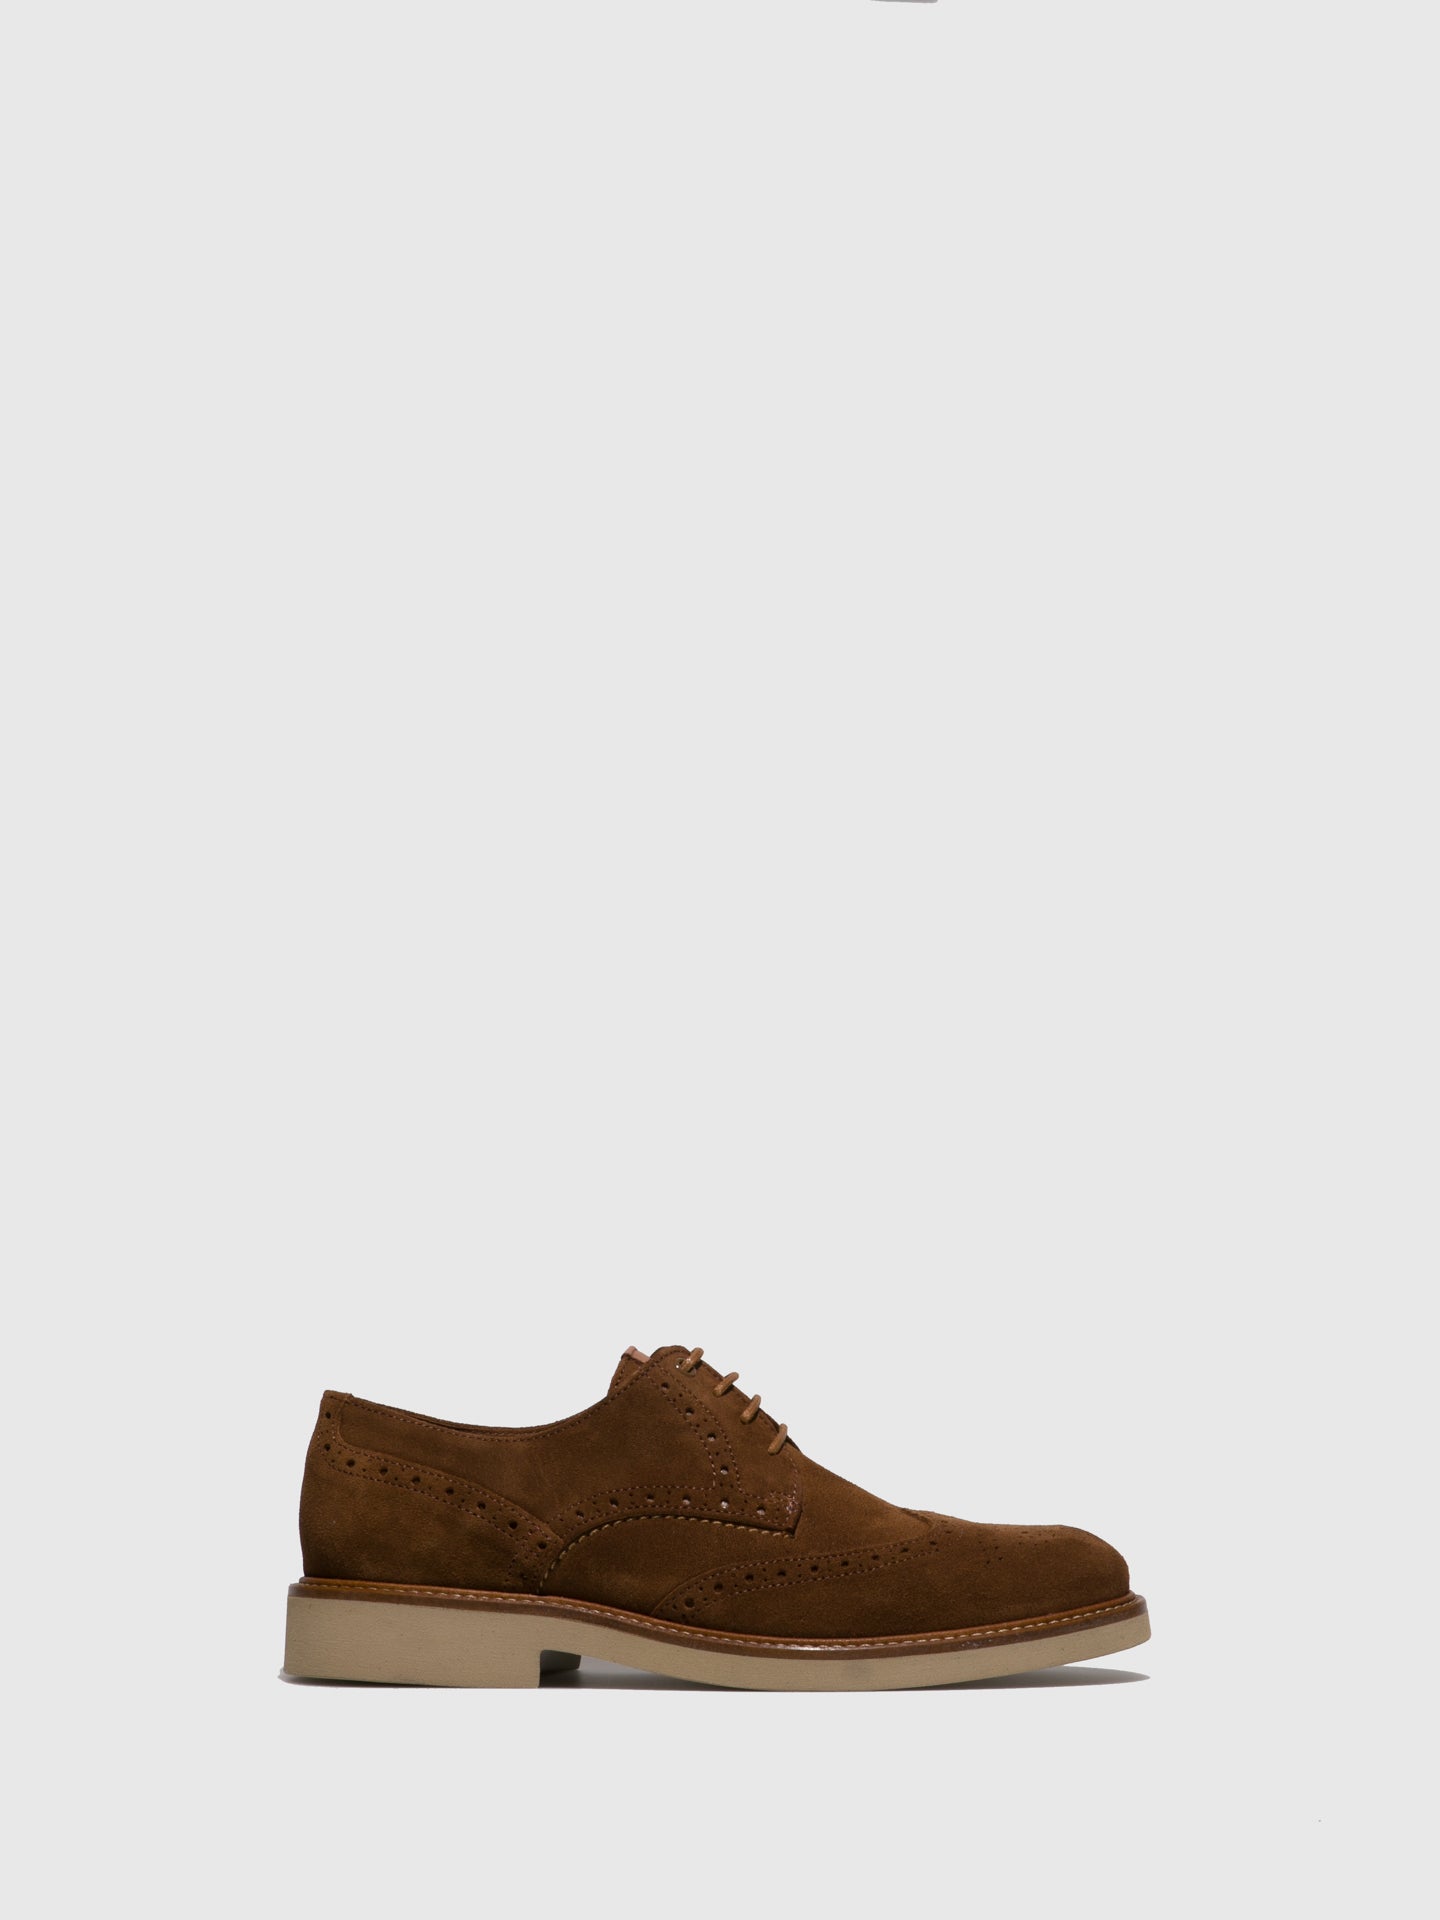 Foreva Brown Oxford Shoes